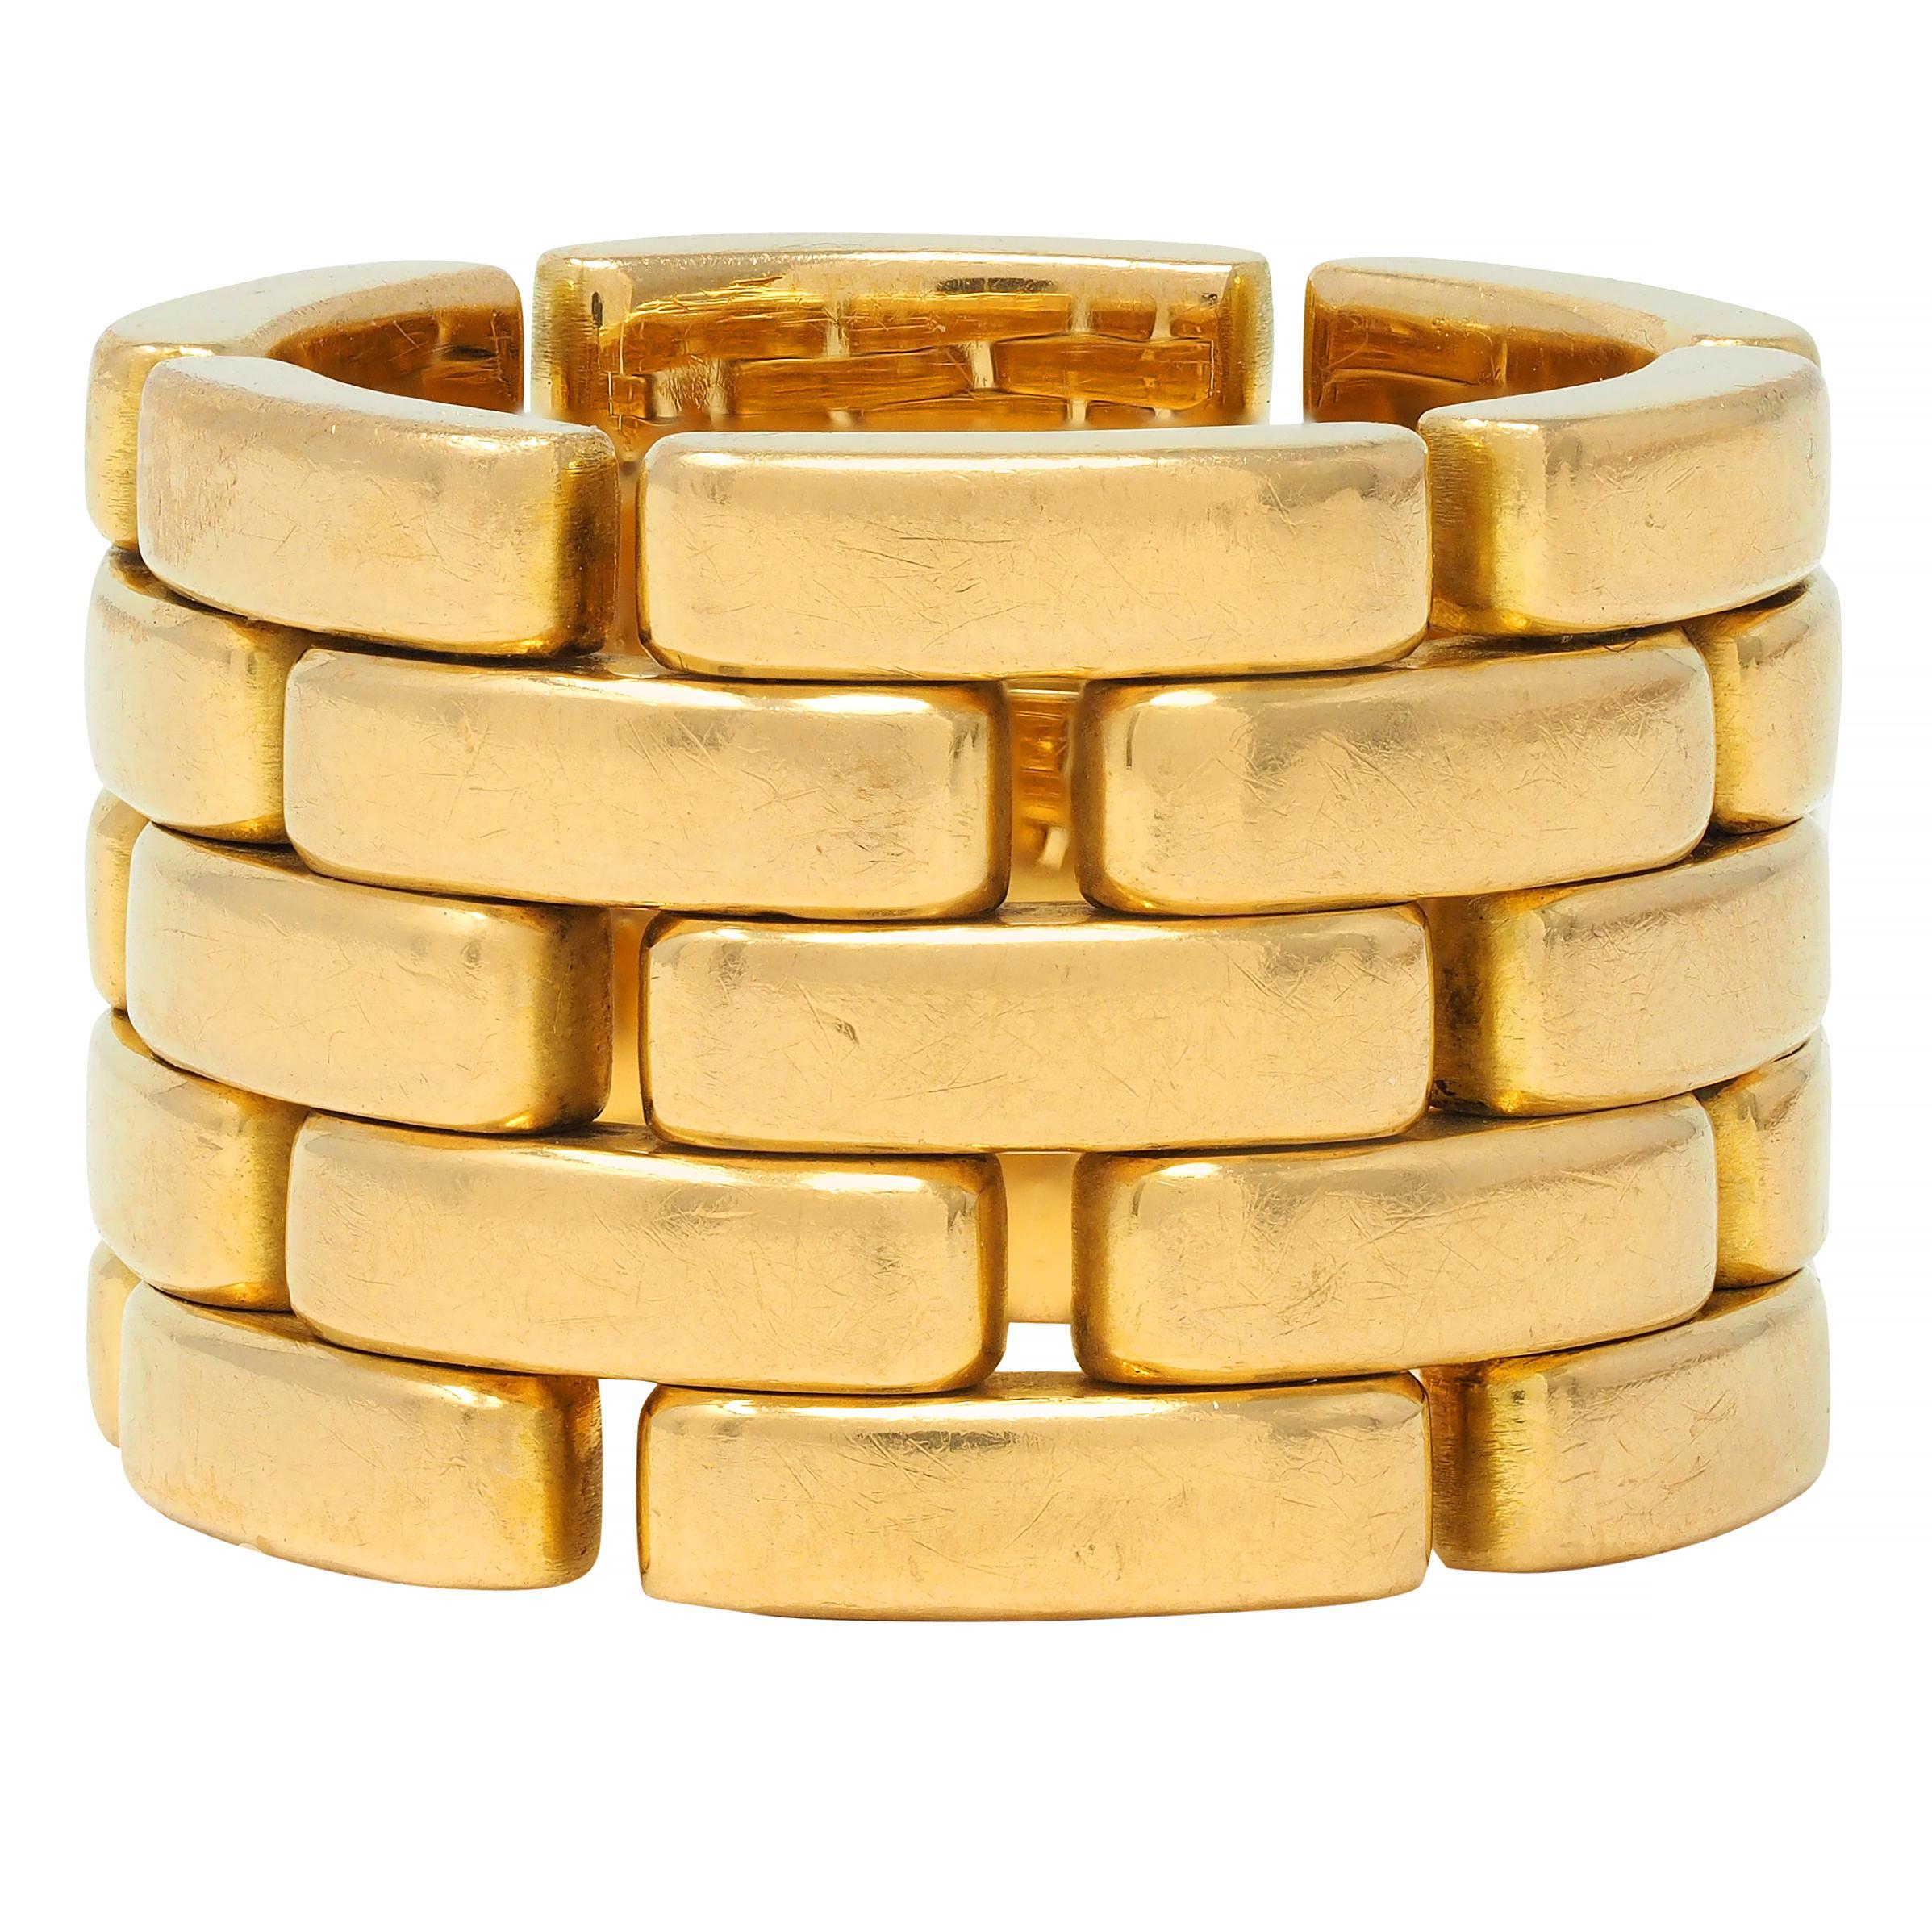 Comprised of five rows of panthére style links 
Meshed fully around with some flexibility
Completed by high polish finish
Stamped with French hallmarks for 18 karat gold
Numbered and fully signed with maker's mark for Cartier
Circa: 2000s; from the